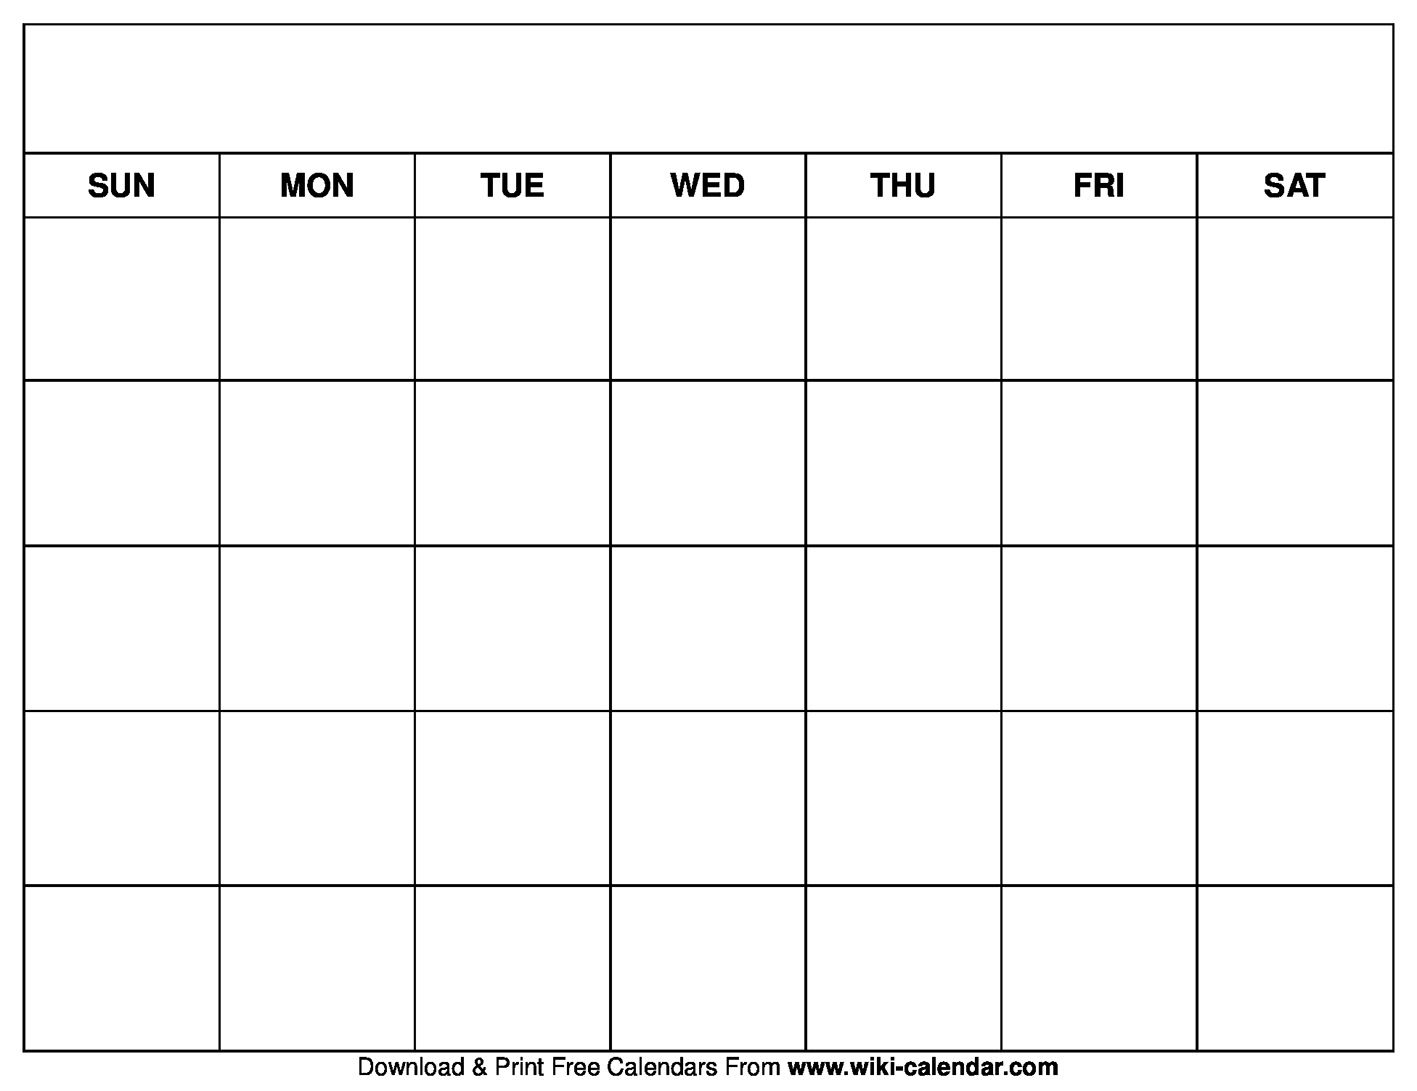 Calendar Template To Fill In And Print | Calender template, Free